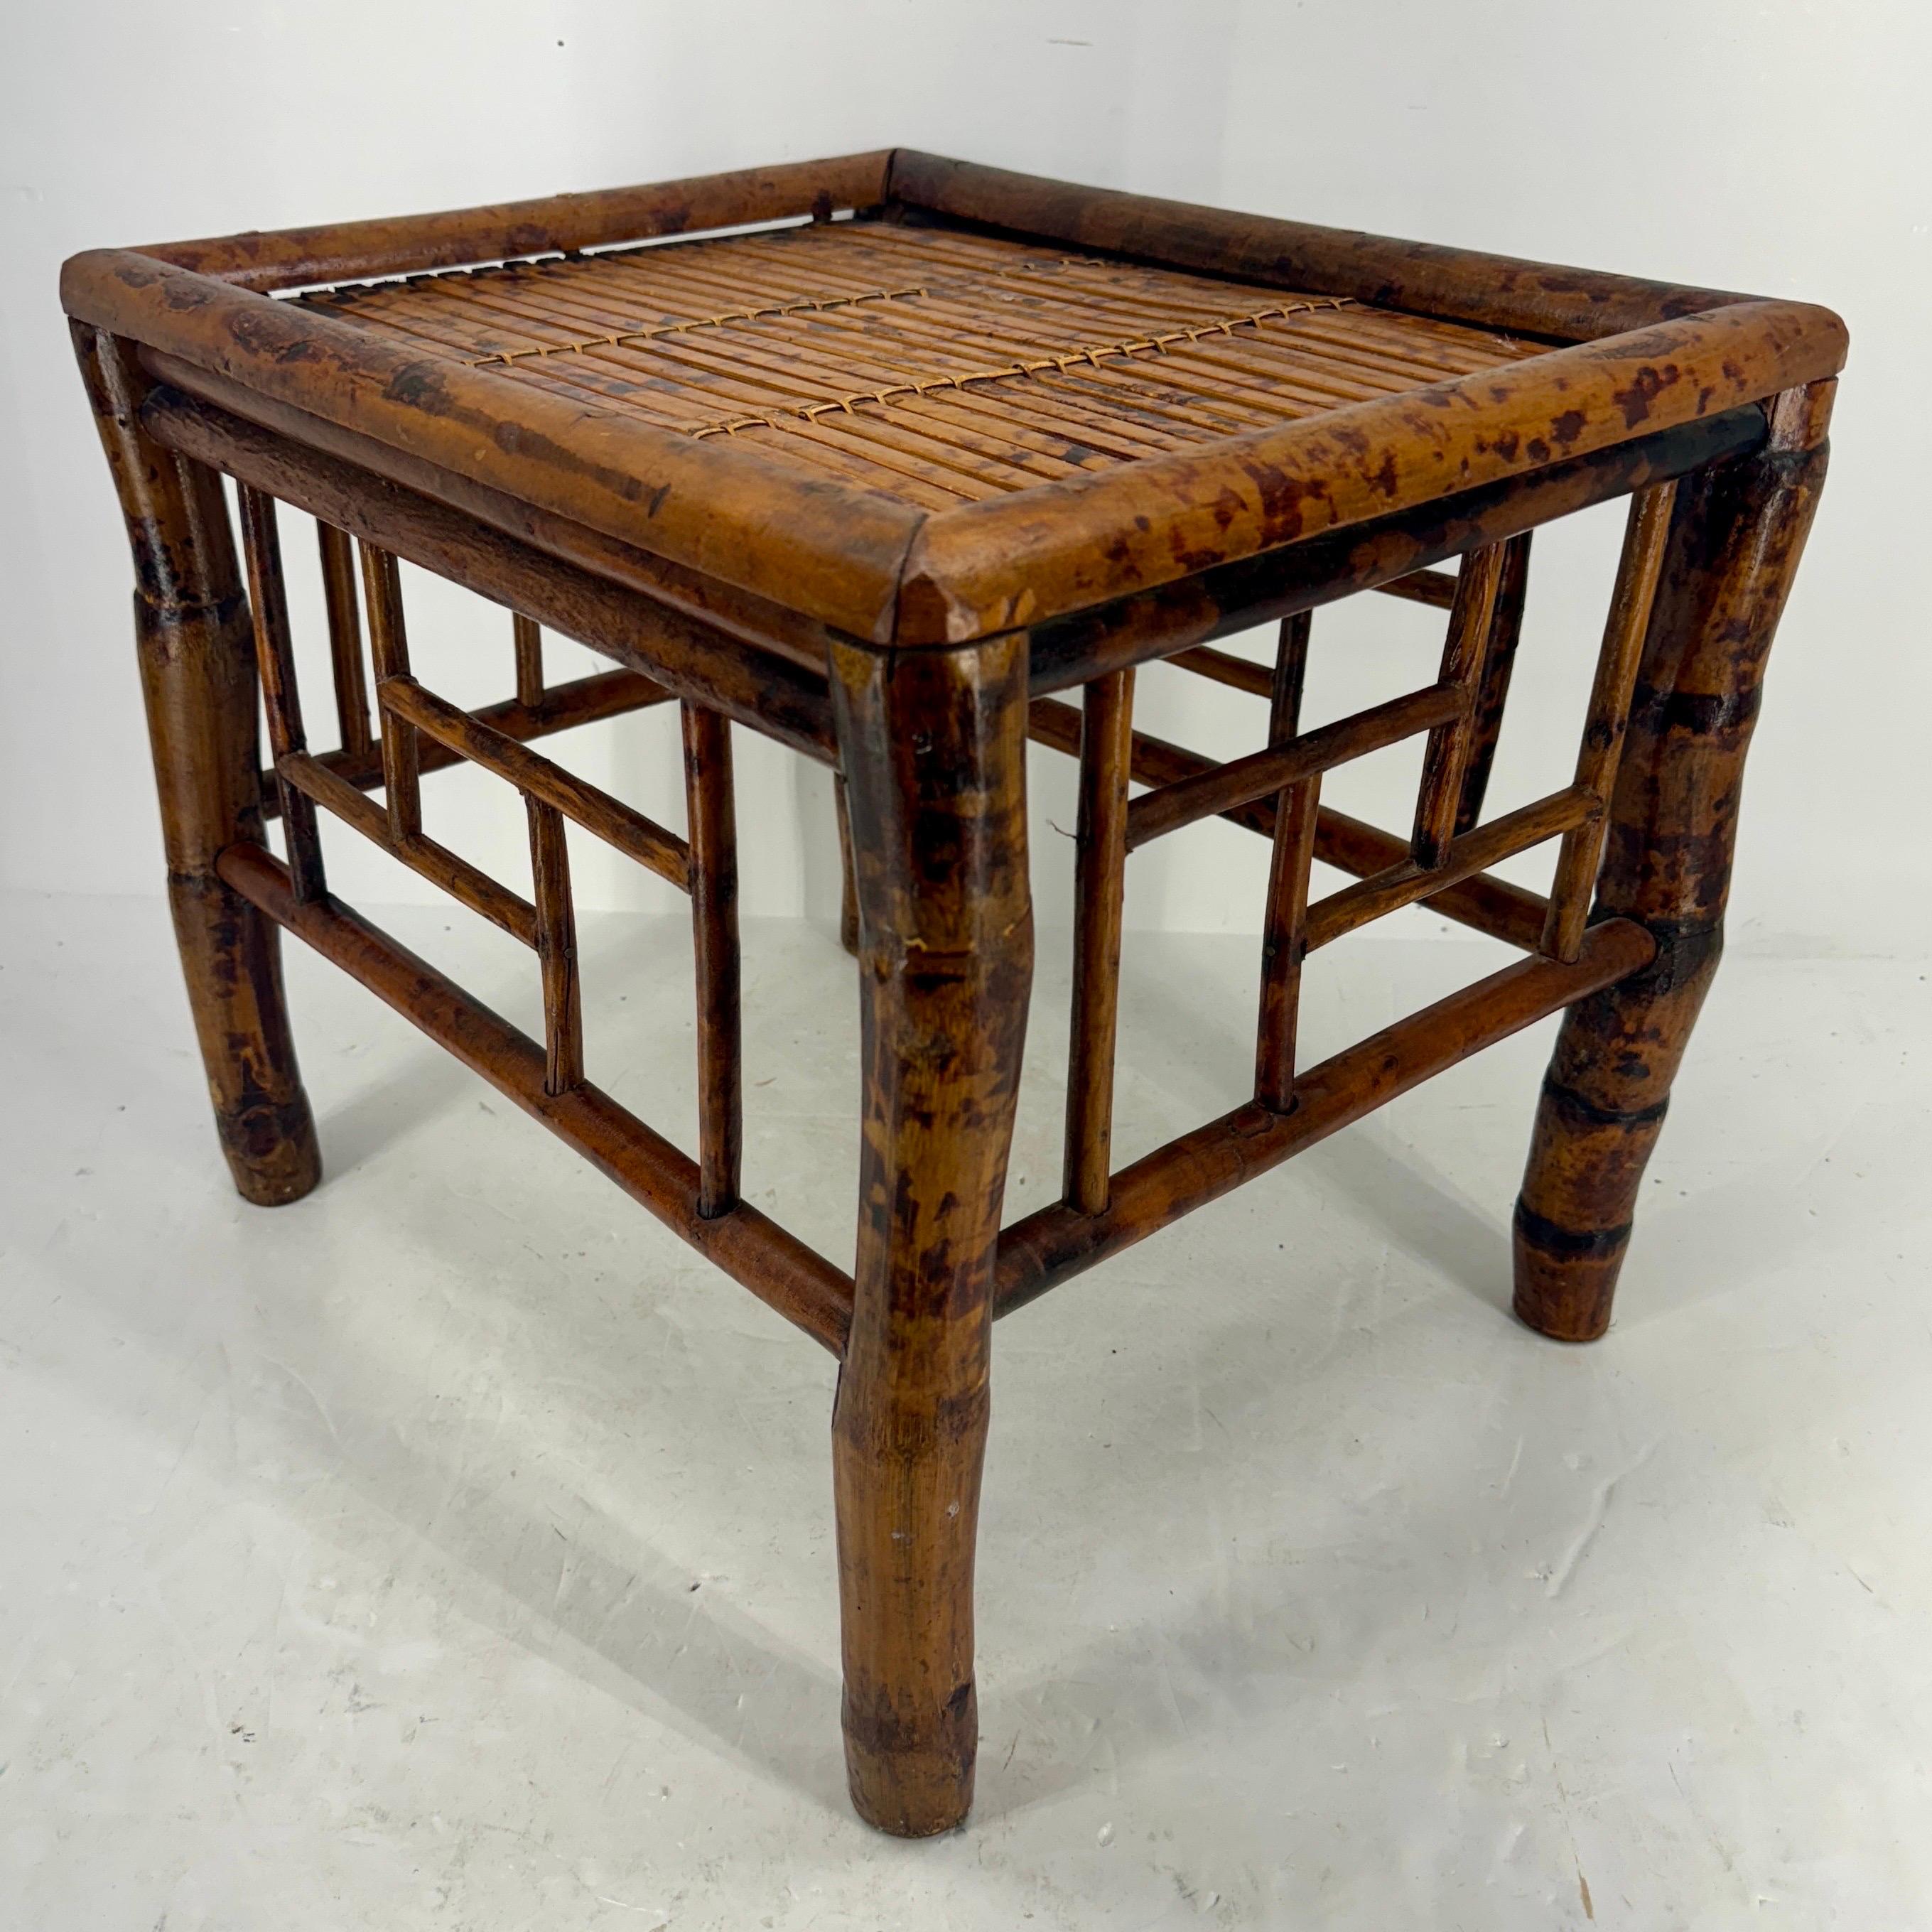 British Colonial English Tortoise Burnt Bamboo Stool or Low Side Table, circa 1960’s For Sale